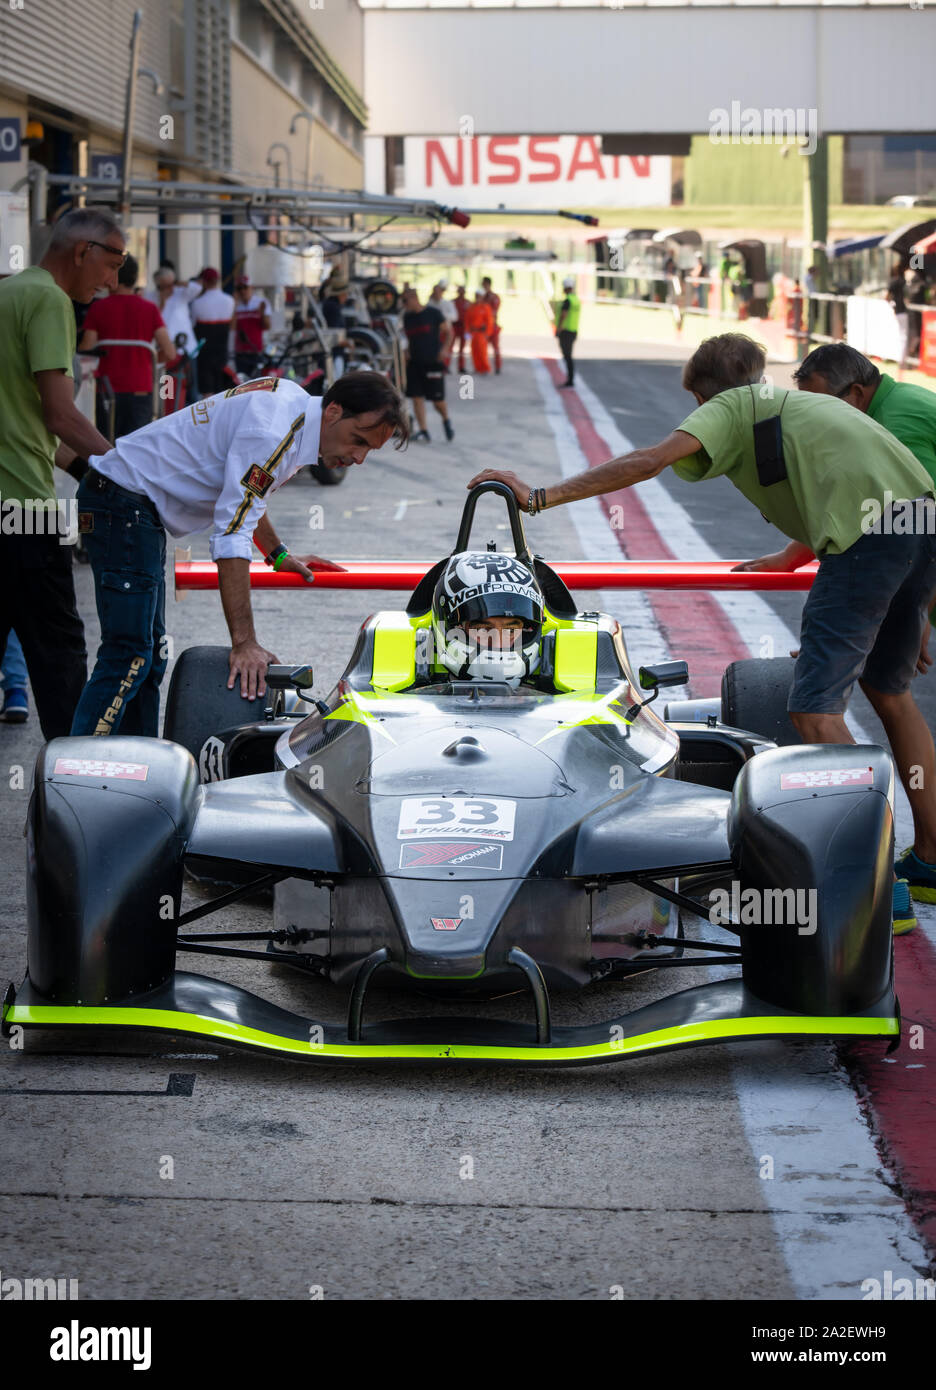 Vallelunga, Italy september 14 2019.  Single seater prototype racing car in circuit pit lane with team people working Stock Photo